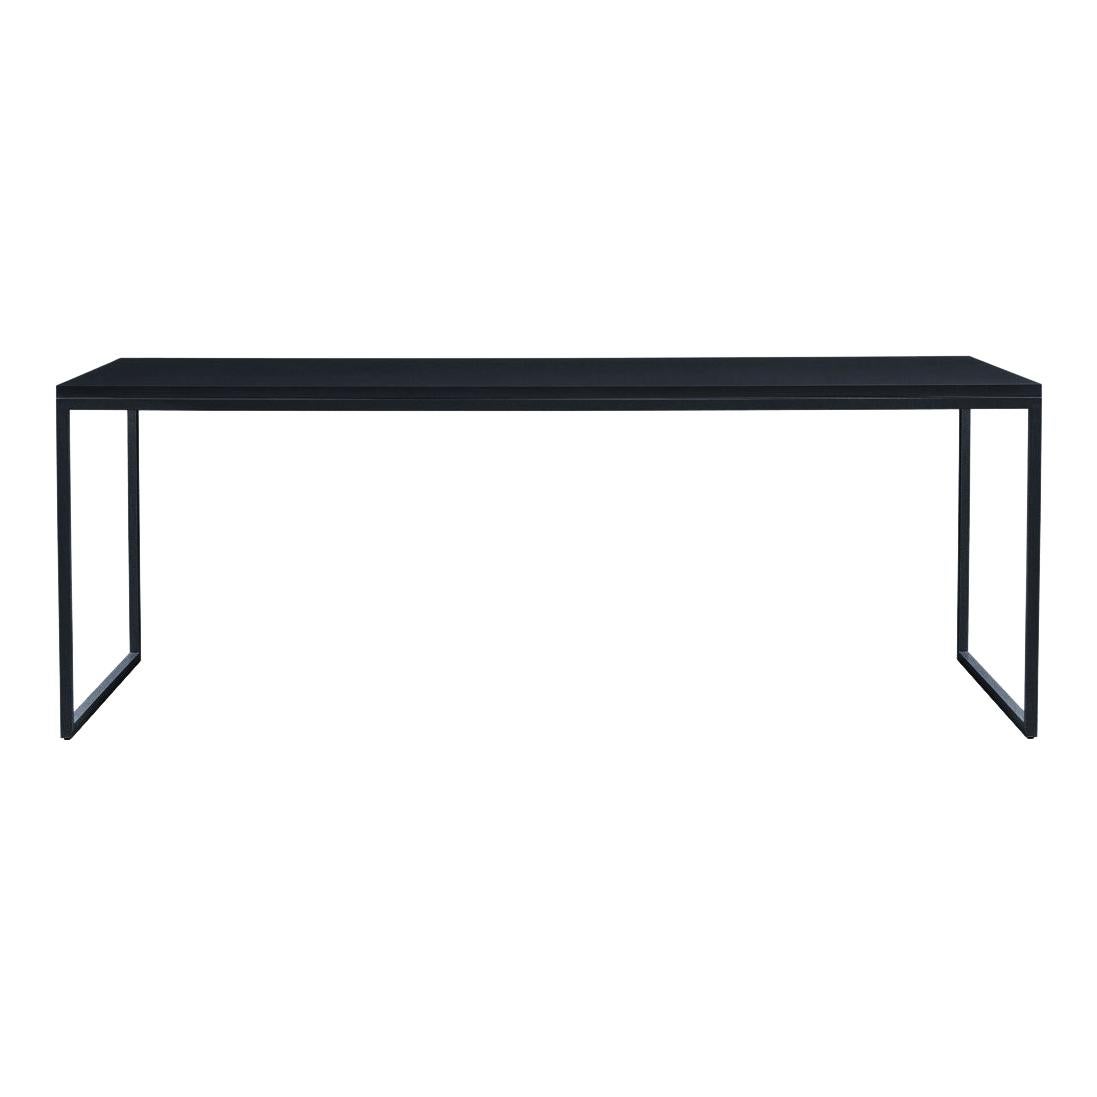 A.G.Fronzoni Rectangular Fronzoni 64 Table in Metal and Wooden Top, Cappellini